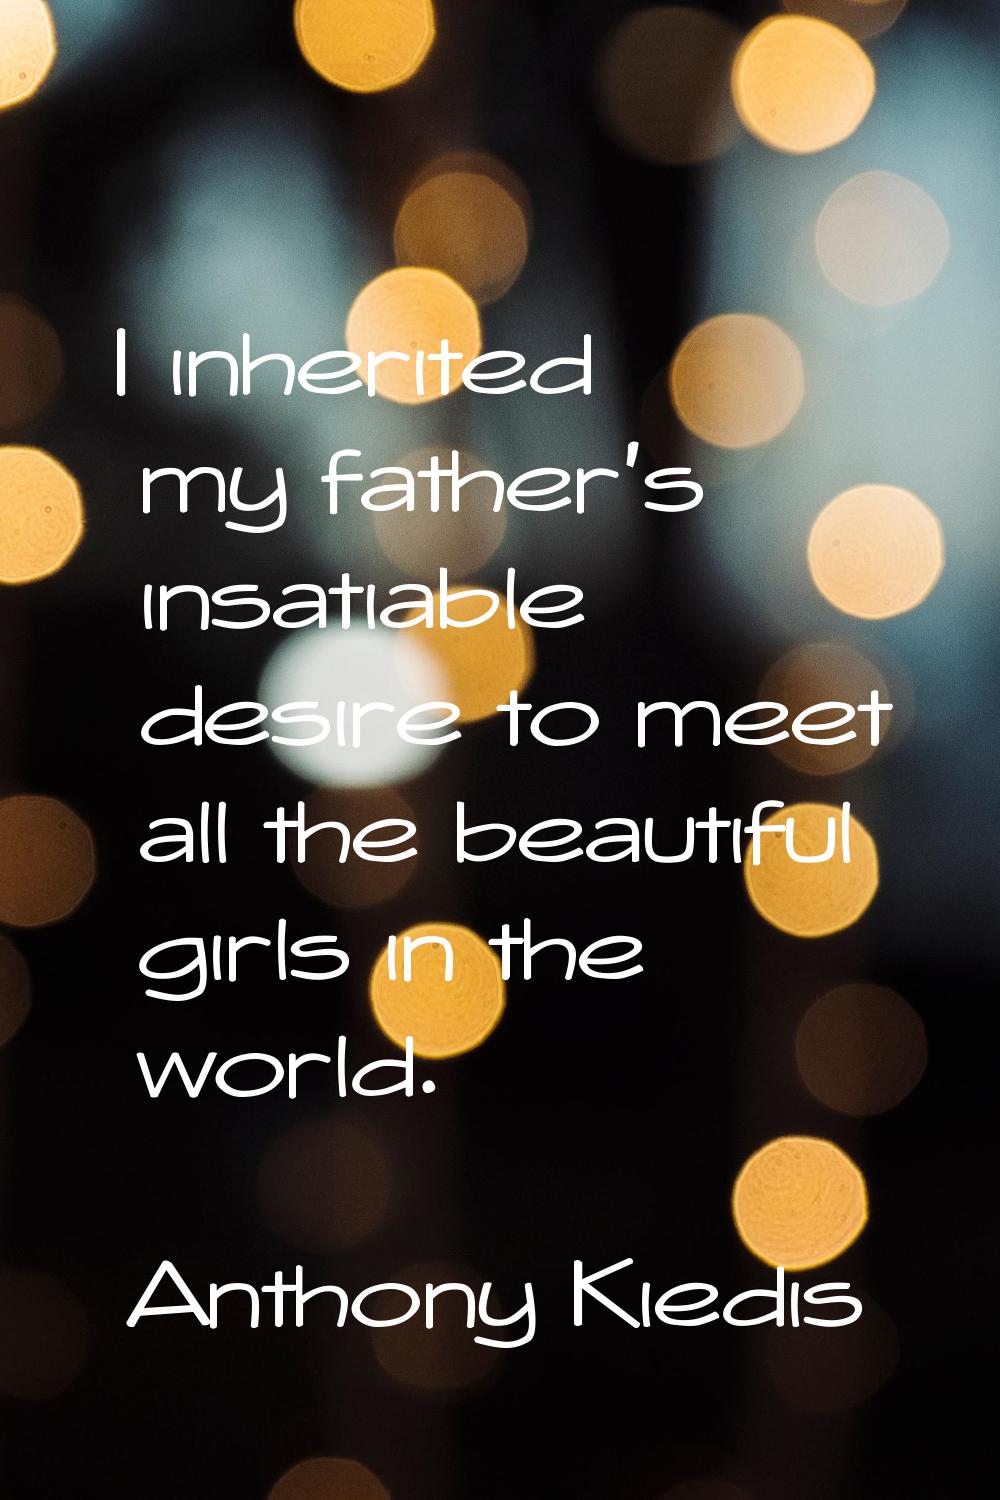 I inherited my father's insatiable desire to meet all the beautiful girls in the world.